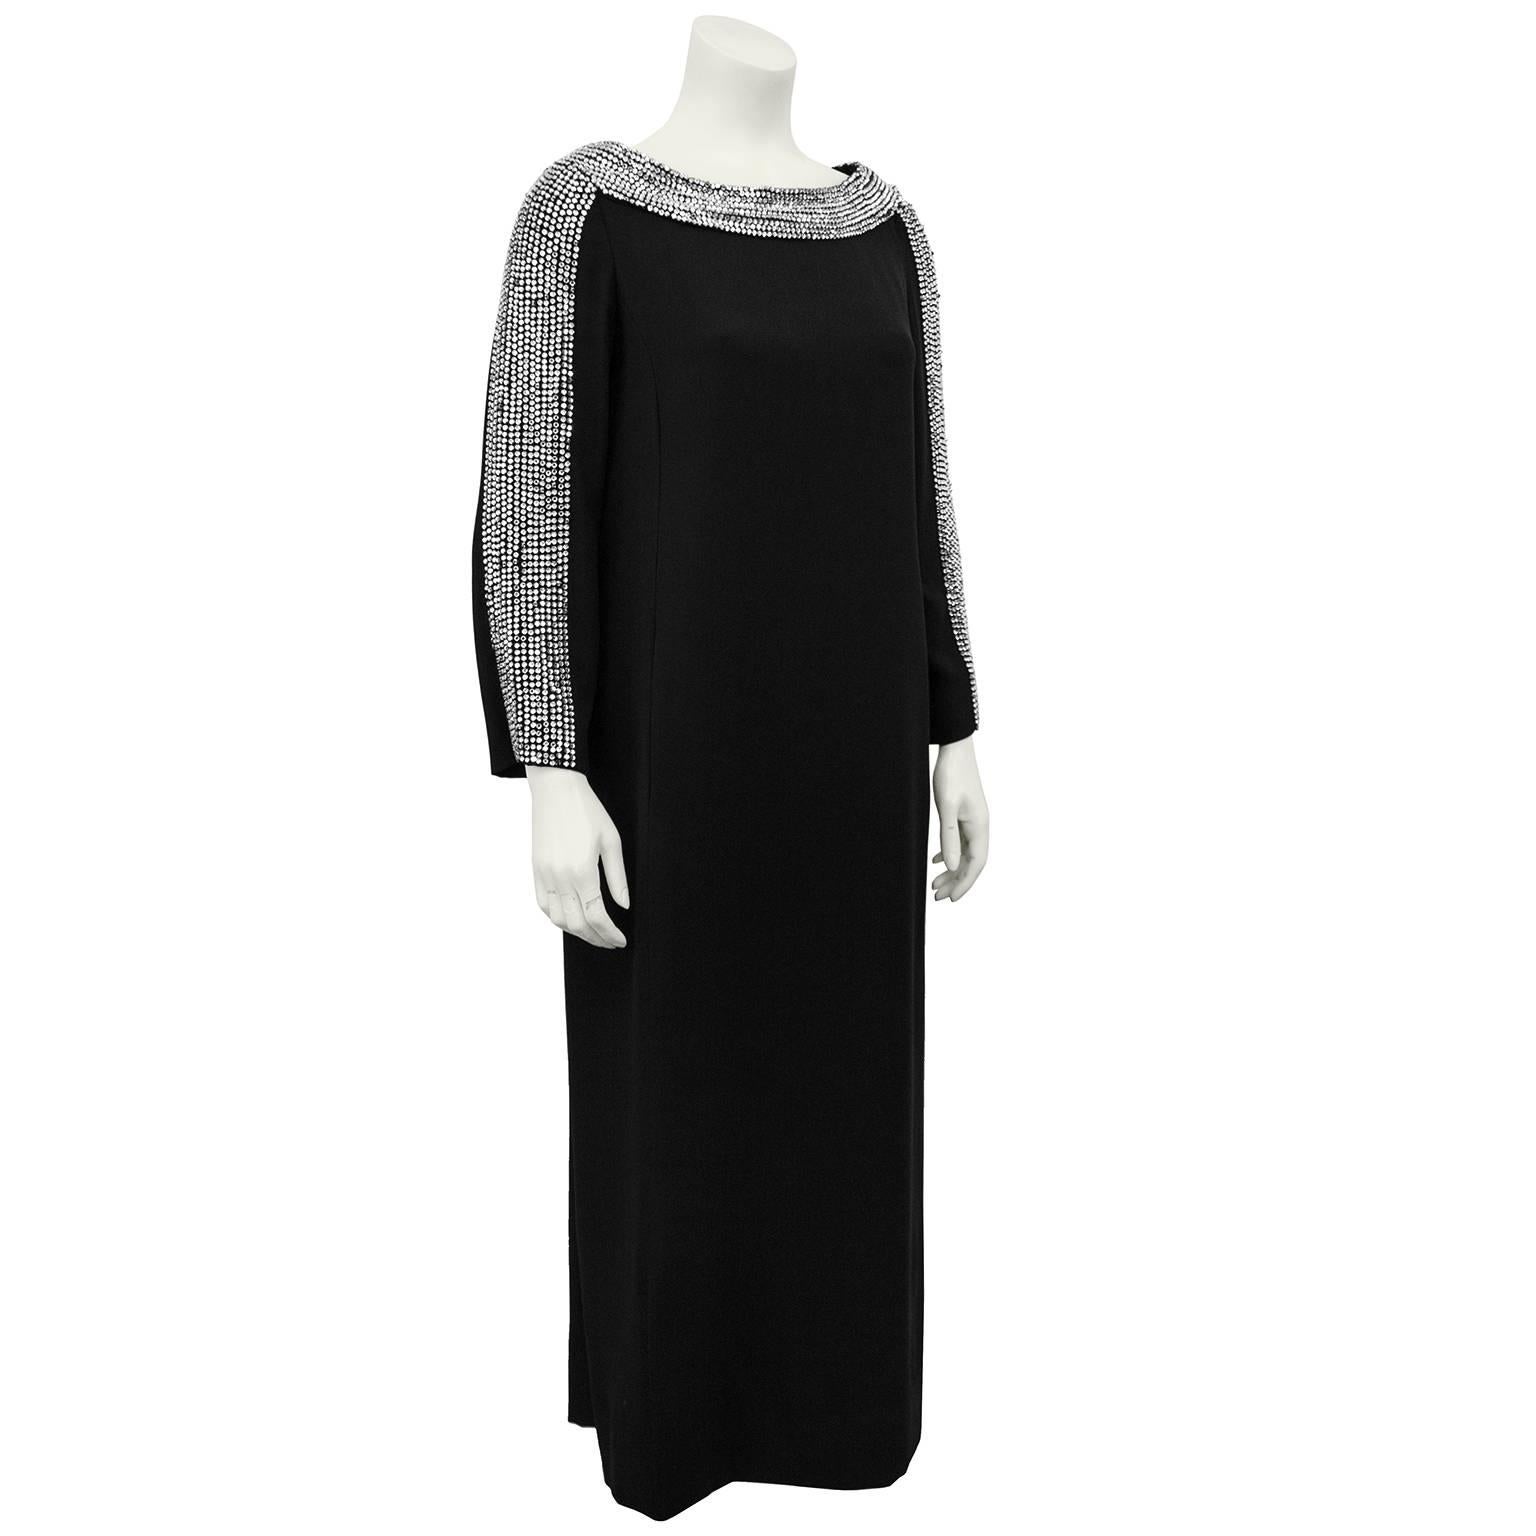 Gorgeous 1970s Ruth McCulloch tea length black crepe evening dress embellished with a thick trim of large rhinestones along the neckline, and down the sleeves. Simple long shift shape with hidden slit pockets and two small slits. Hidden zipper at